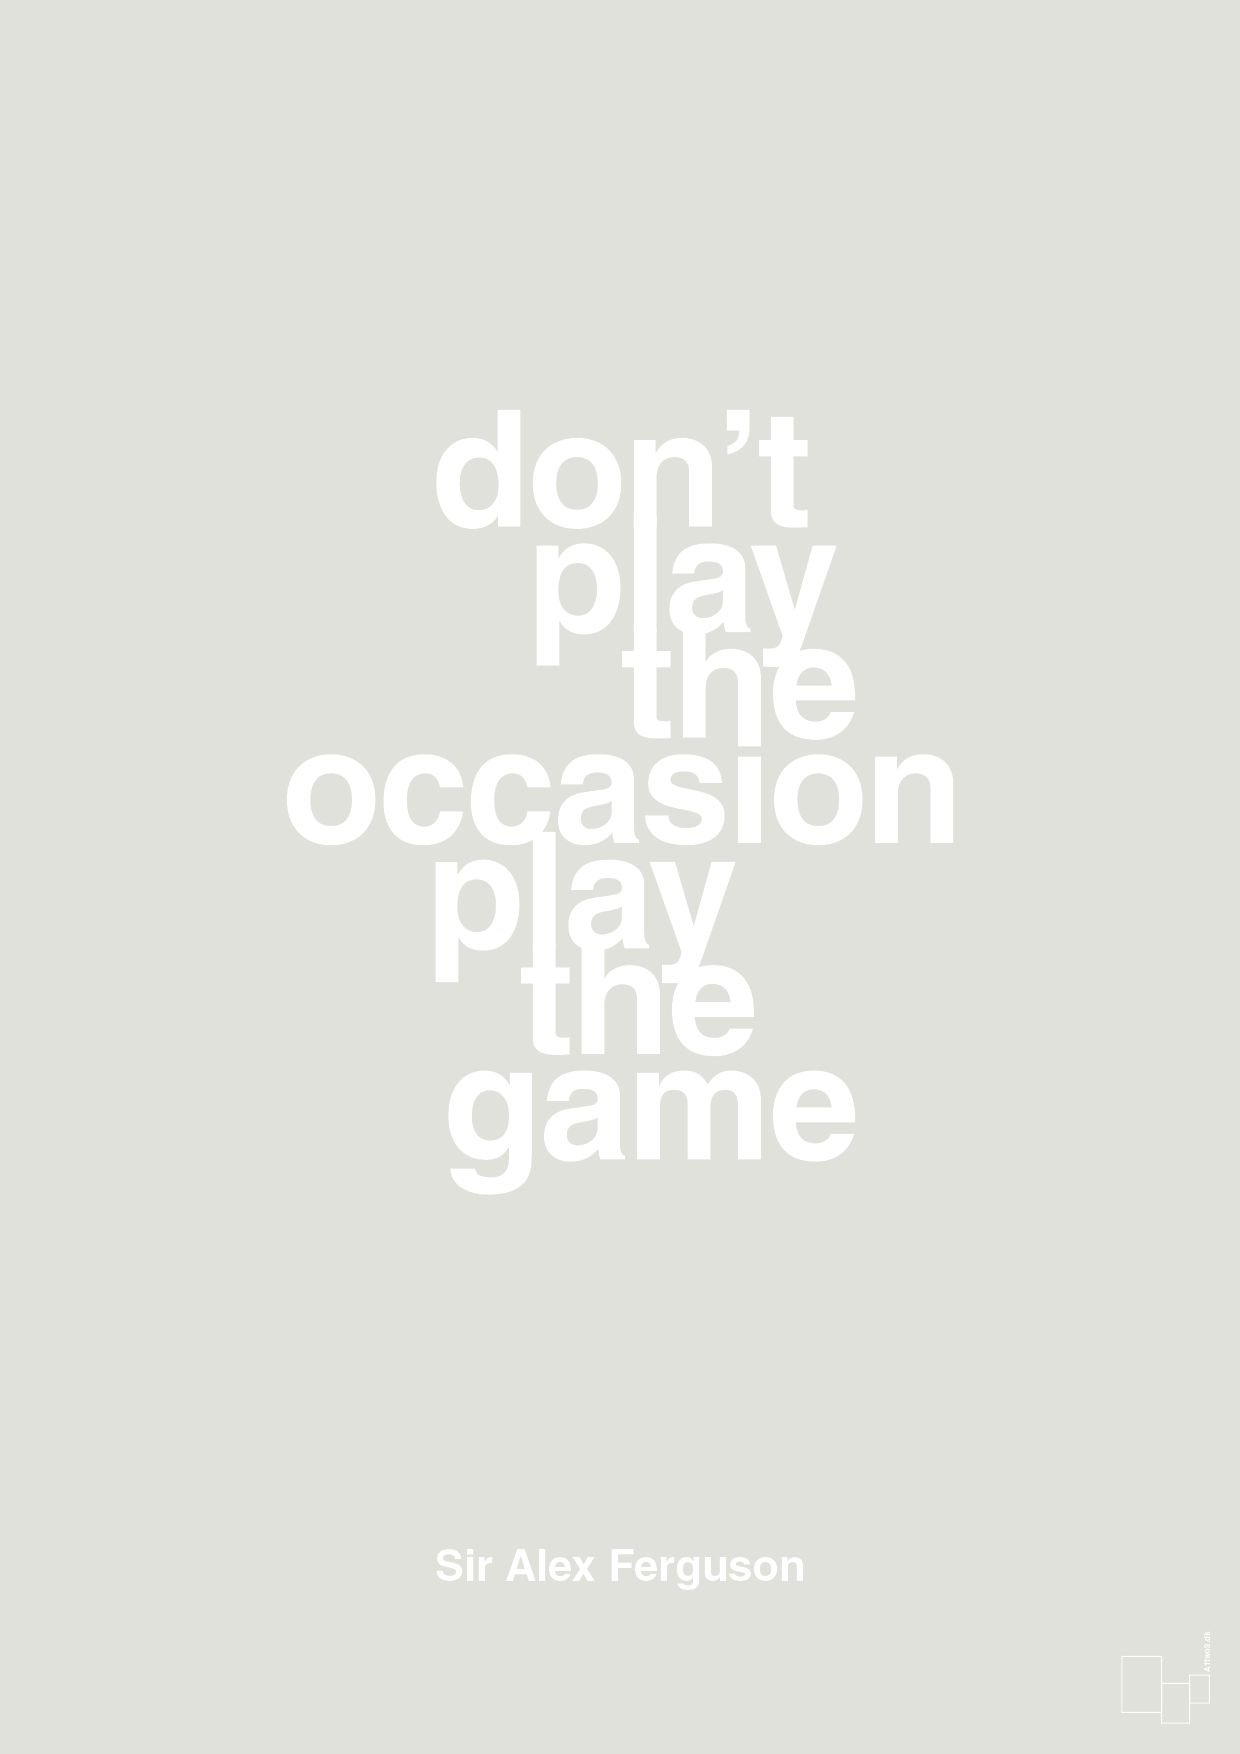 don’t play the occasion play the game - Plakat med Citater i Painters White